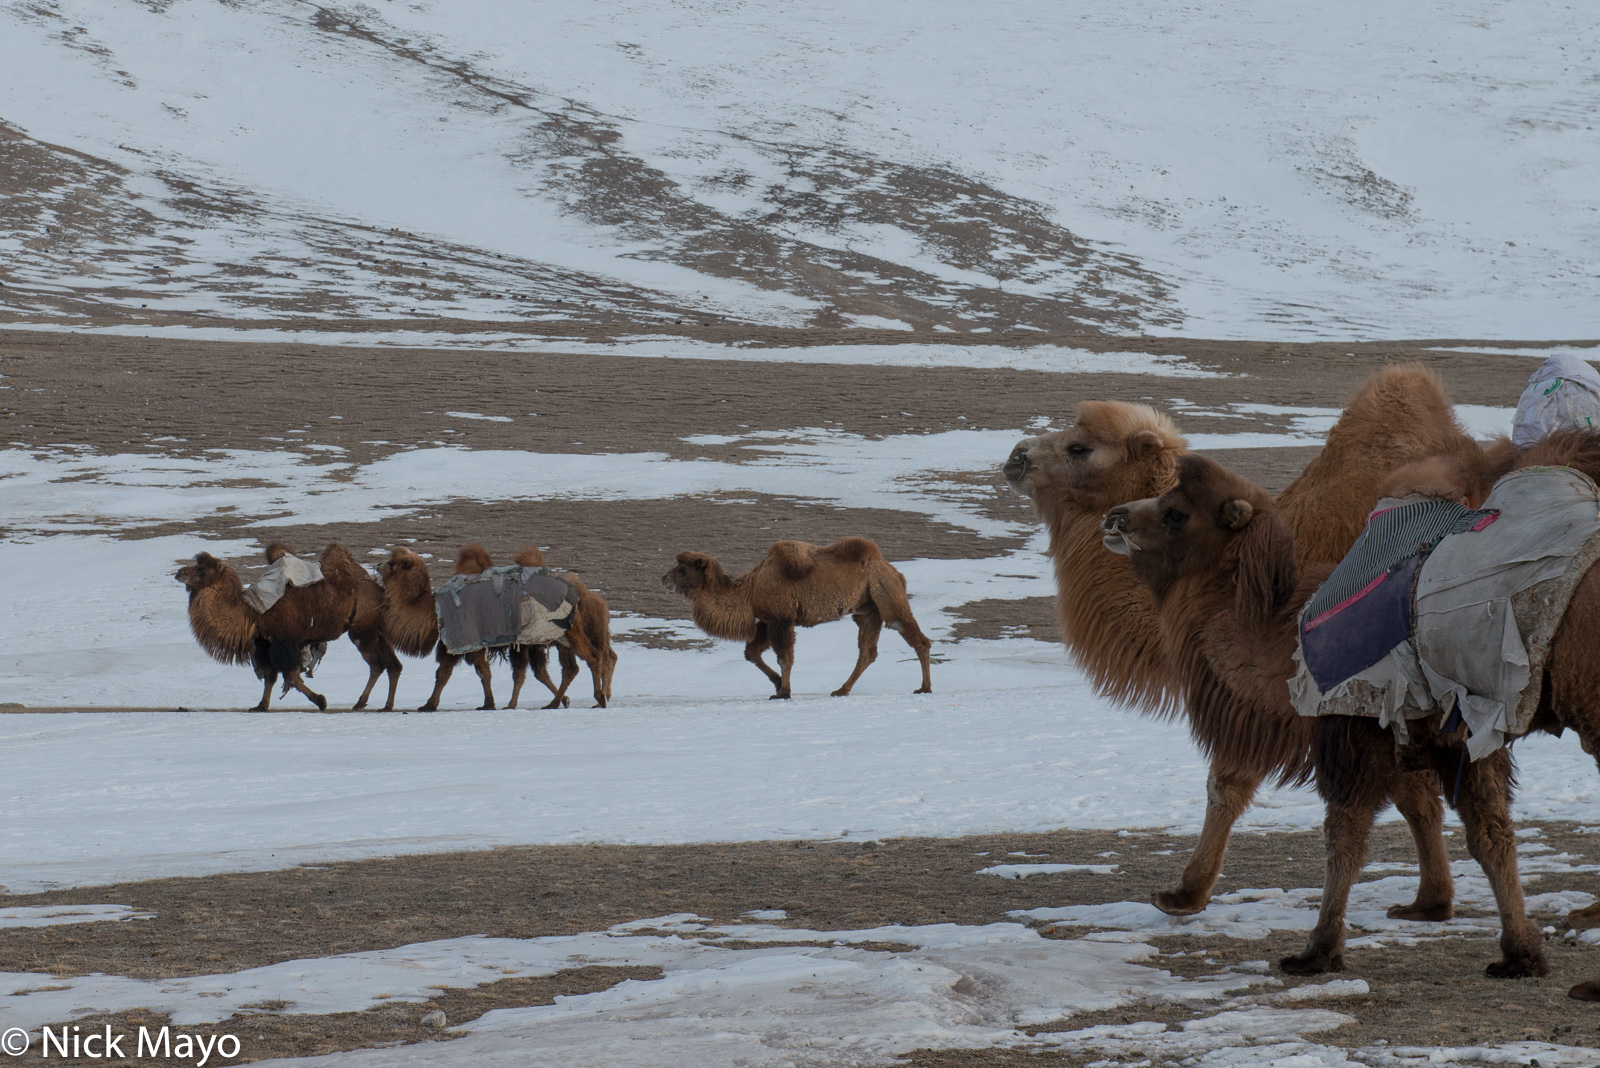 Bactrian camels in a snowy valley in Sagsai sum.